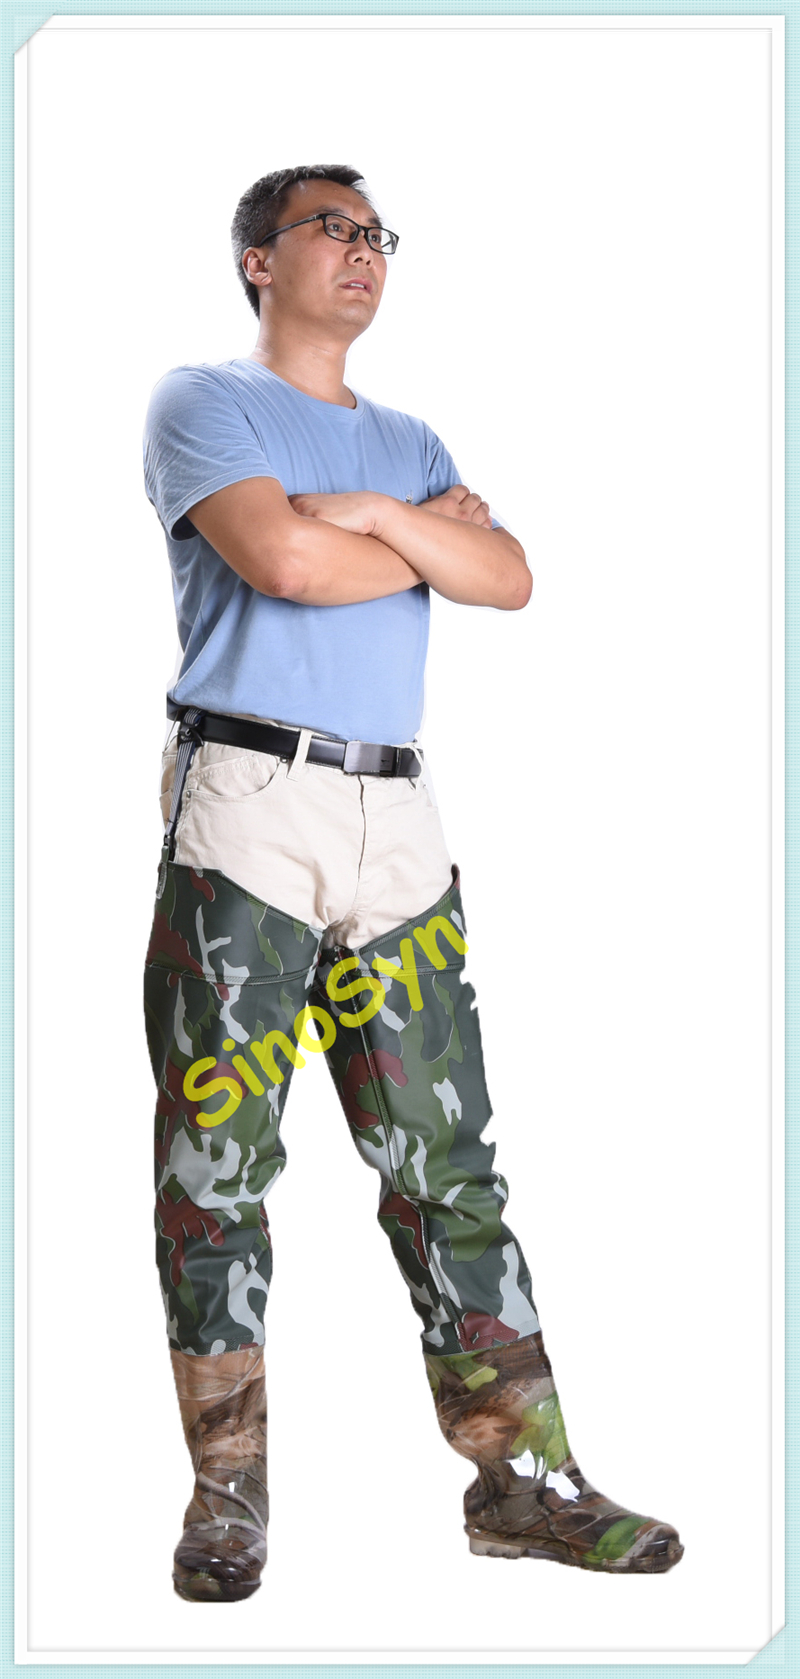 FQT1902 Army-Camouflage PVC Skidproof Underwater Outdoor Fishing Waders with Rain Boots